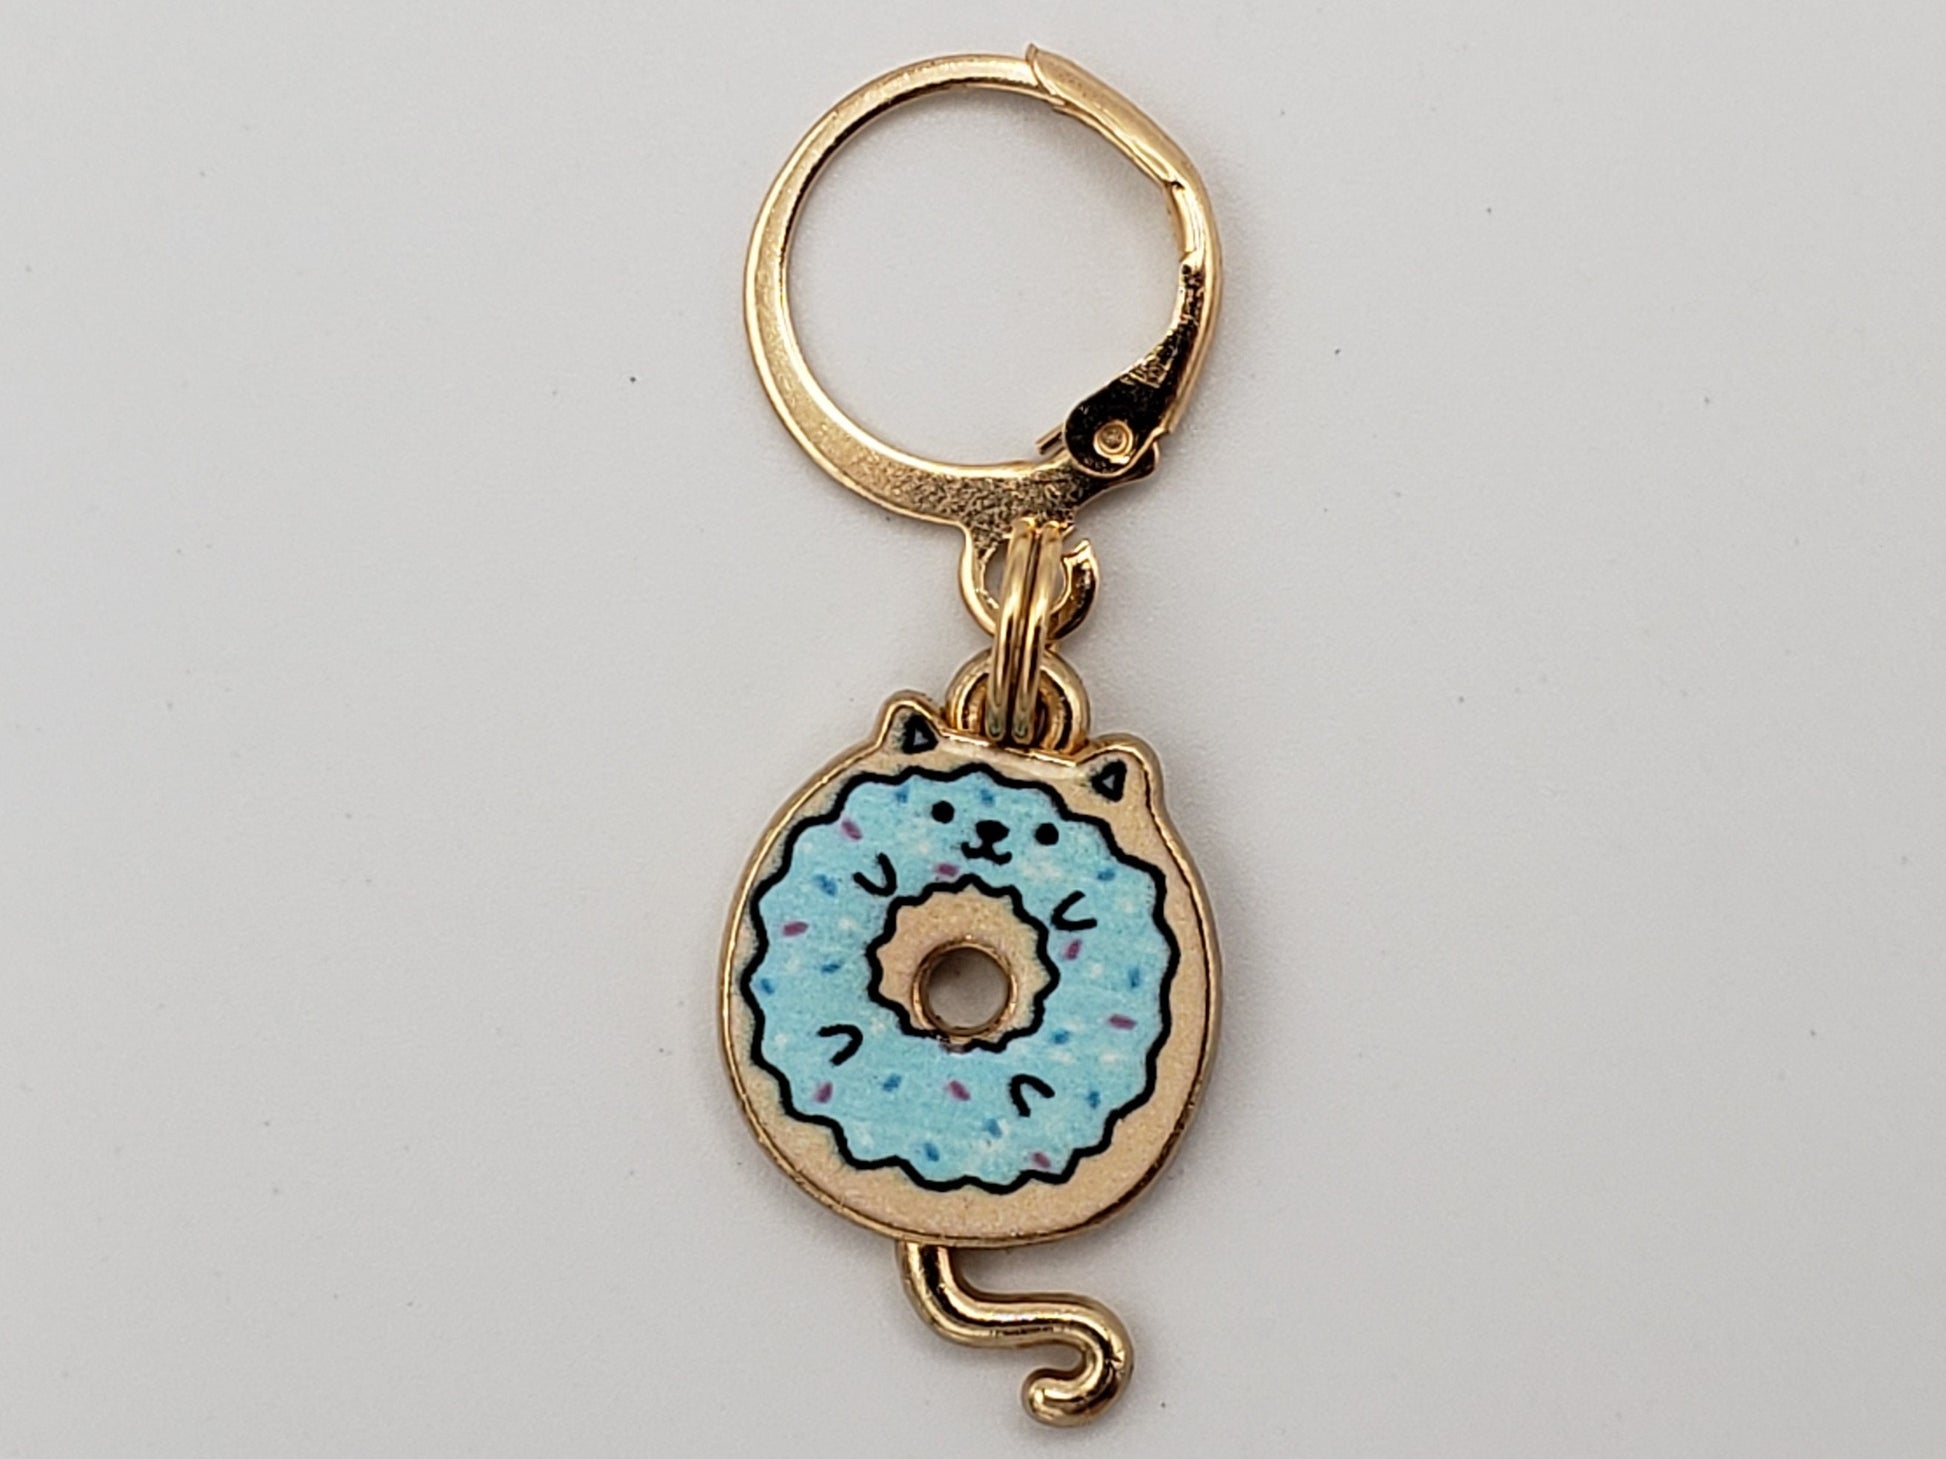 Donut Cat Stitch Markers for Knitting, 3pc | Crochet stitch marker, progress keeper, project bag charms, crochet accessory